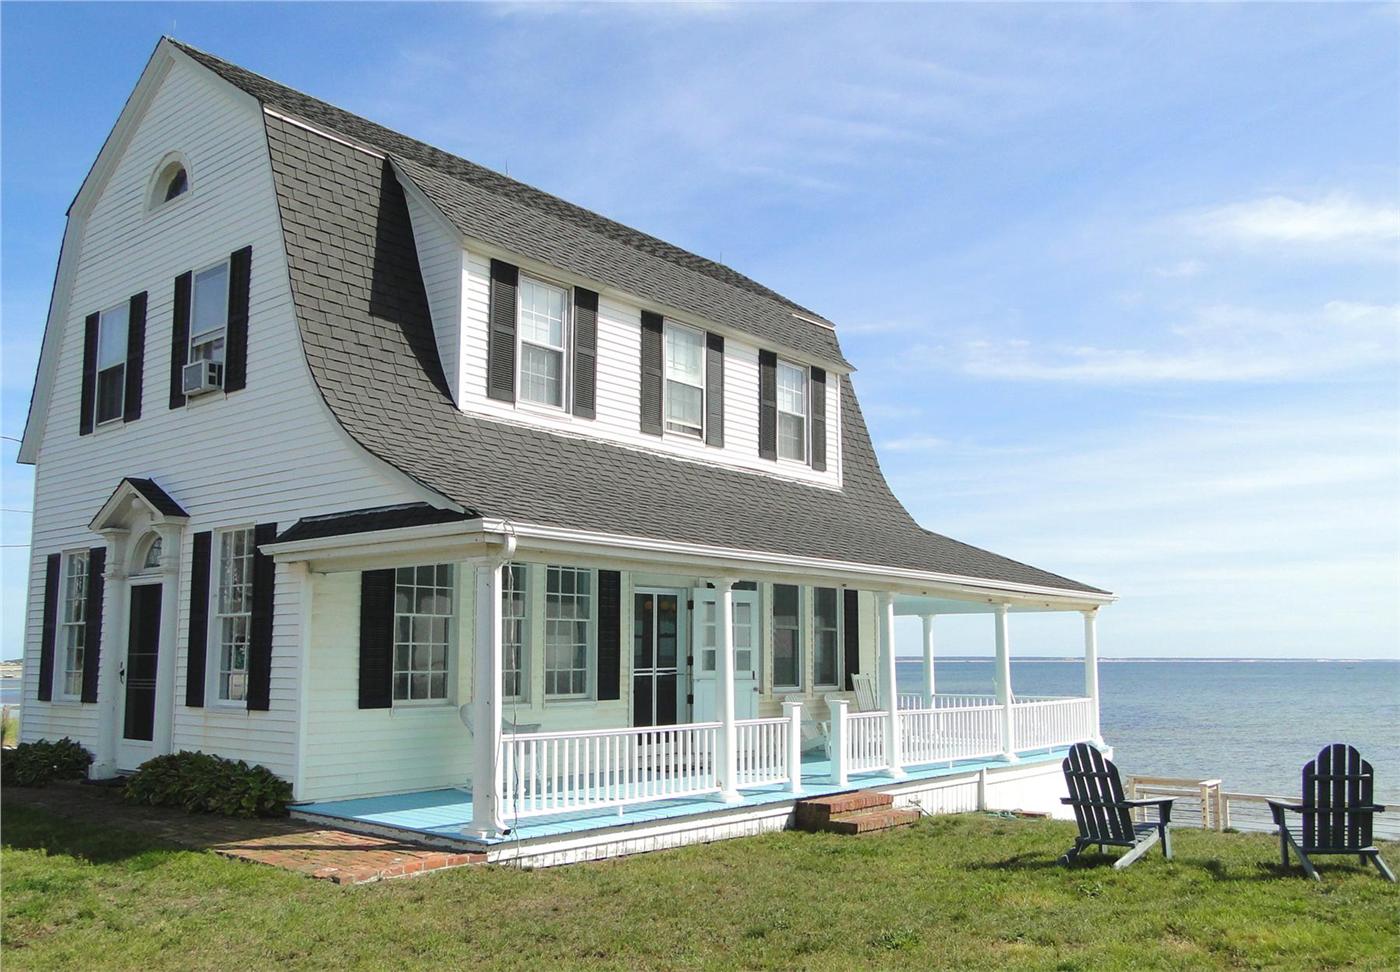 Provincetown Vacation Rental home in Cape Cod MA 02657 